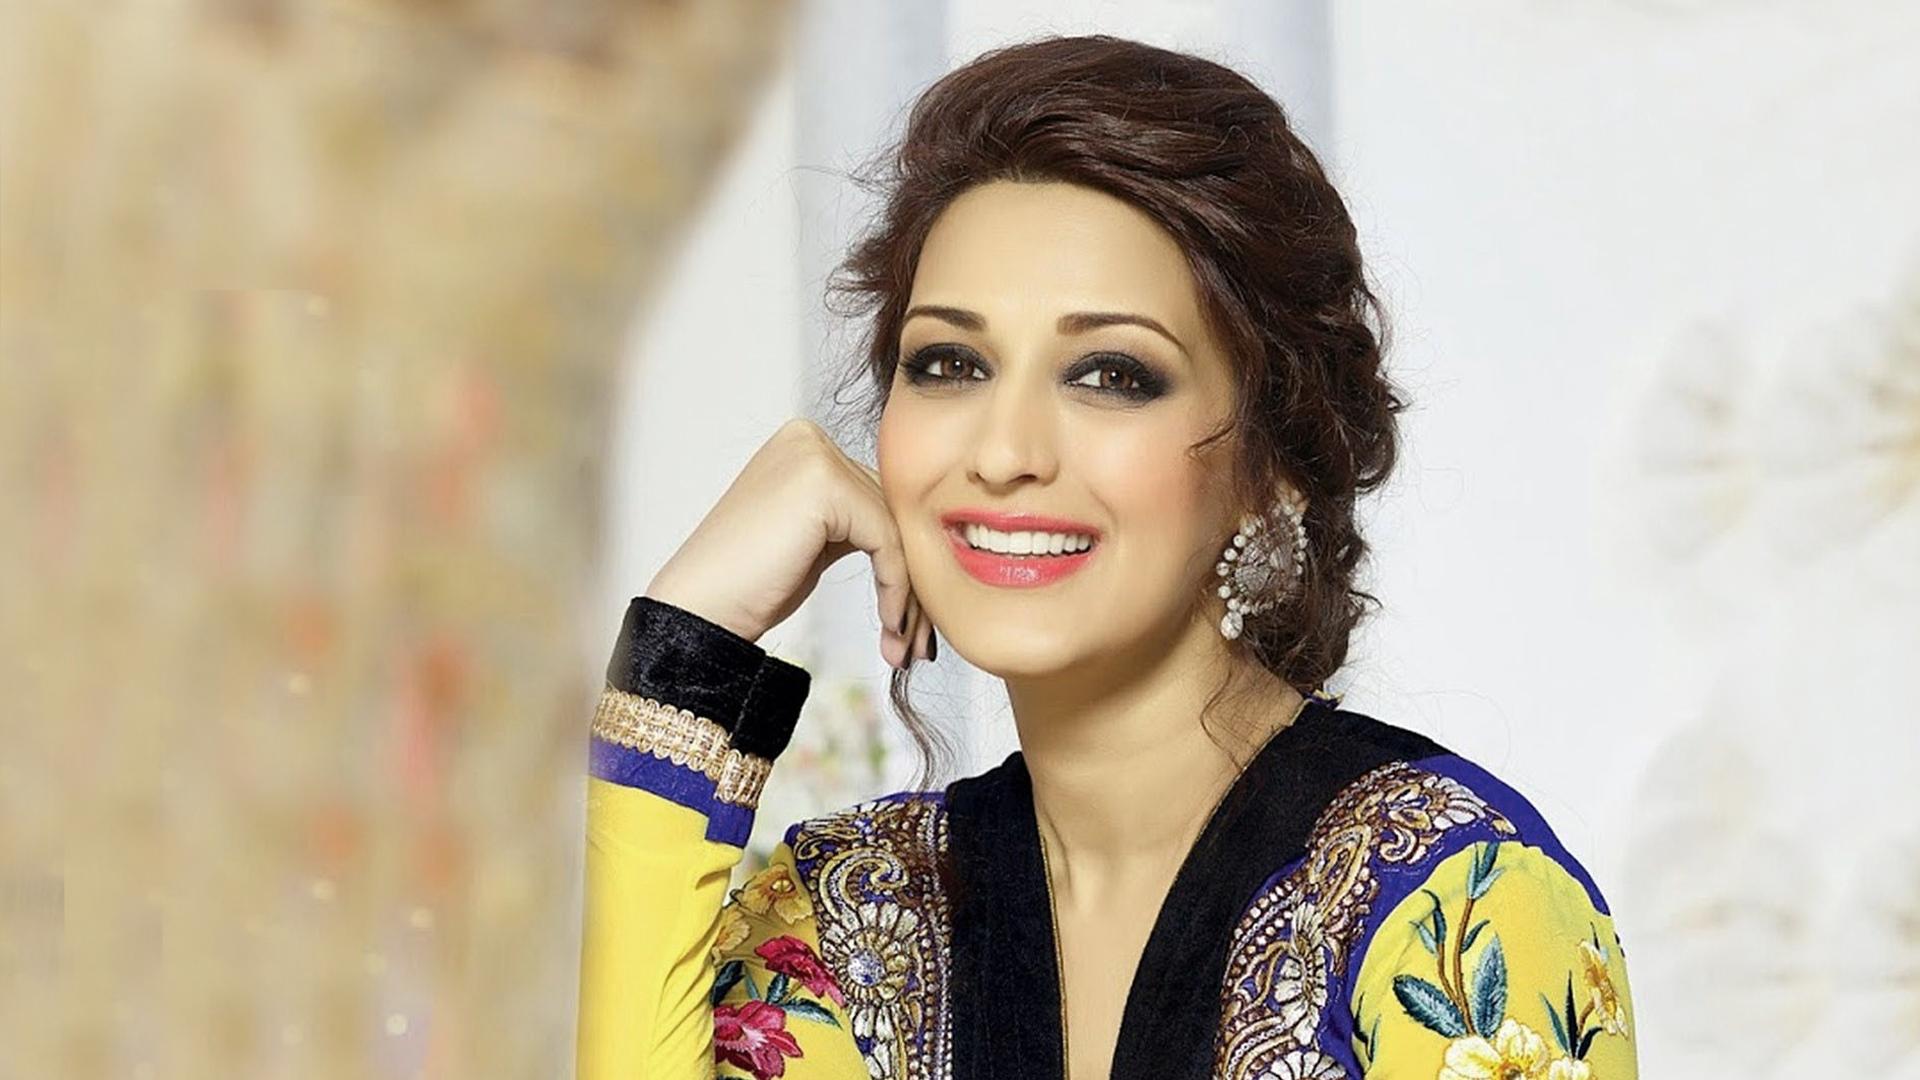 Sonali Bendre Wallpaper High Resolution and Quality Download